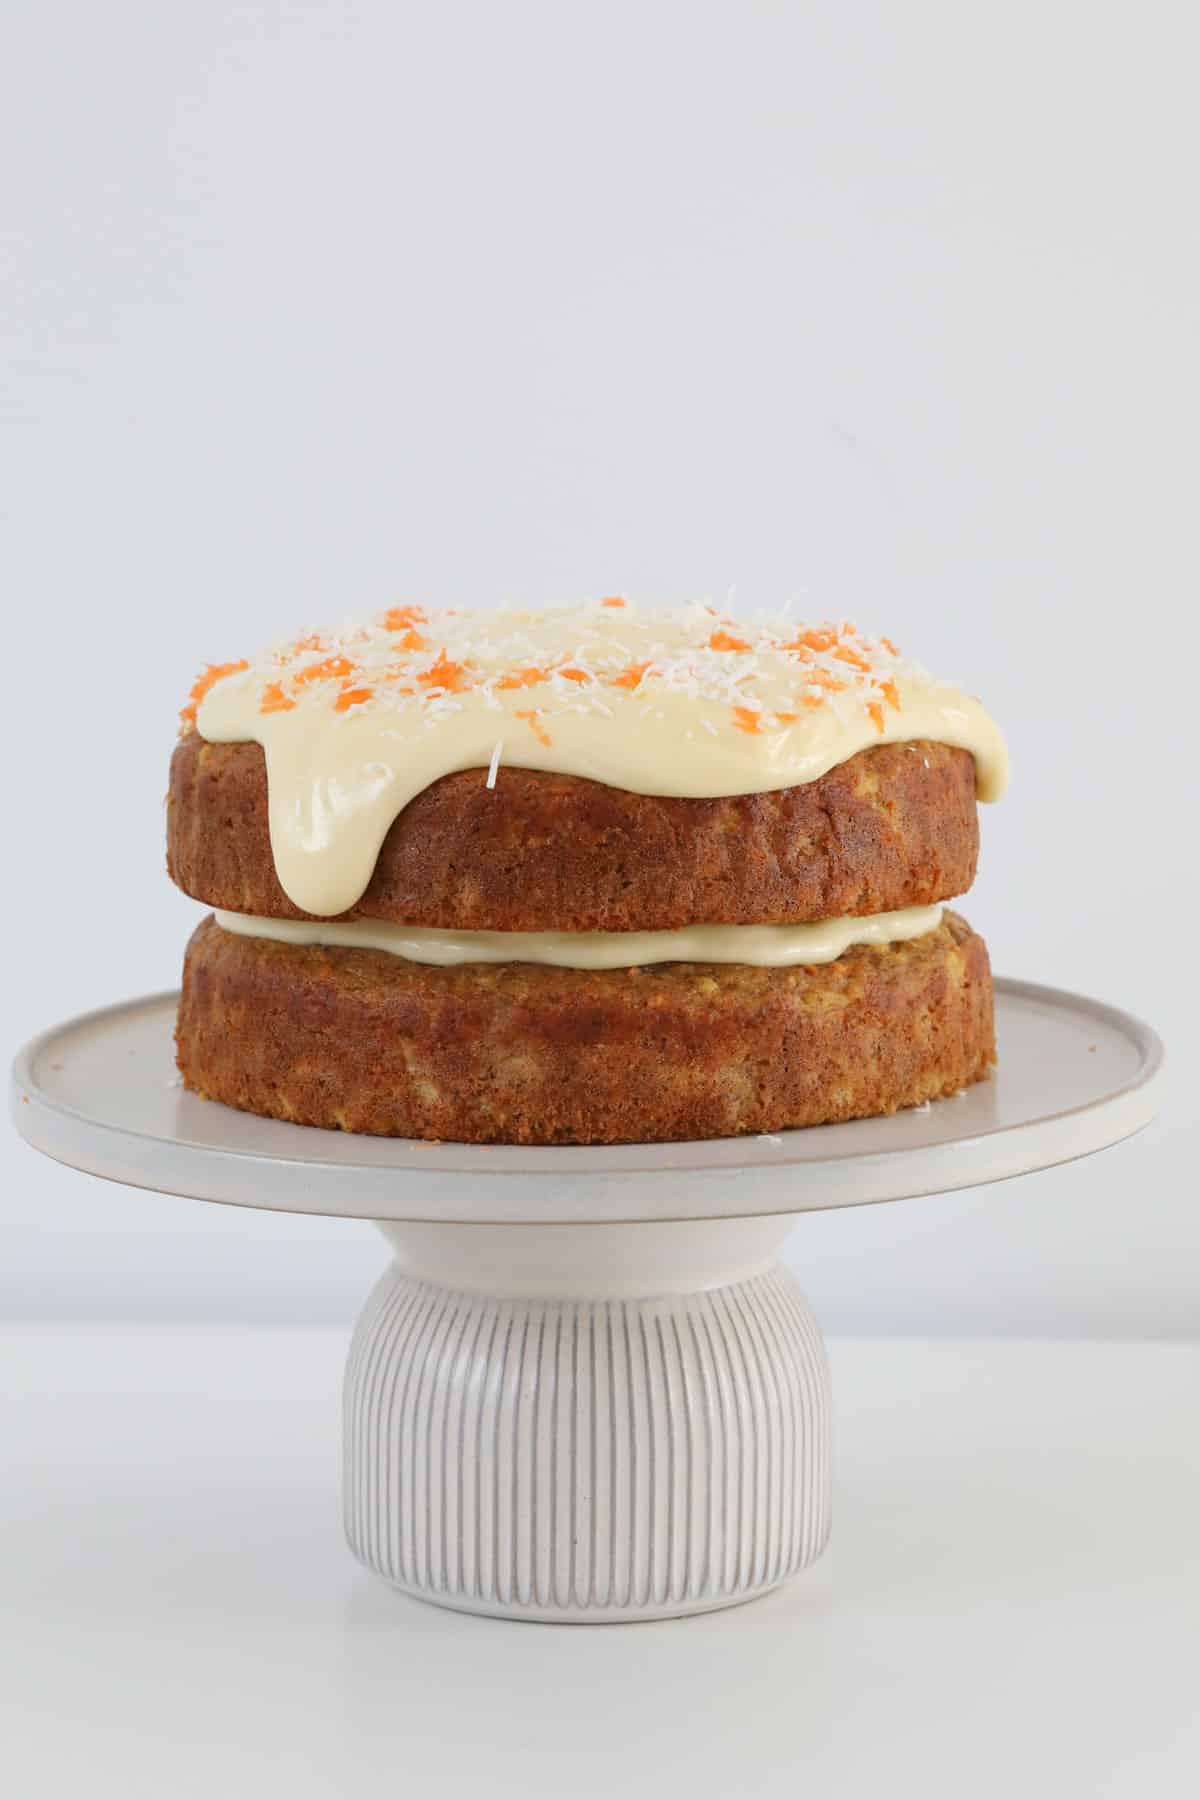 A layered carrot cake on a cake stand with cream cheese frosting.